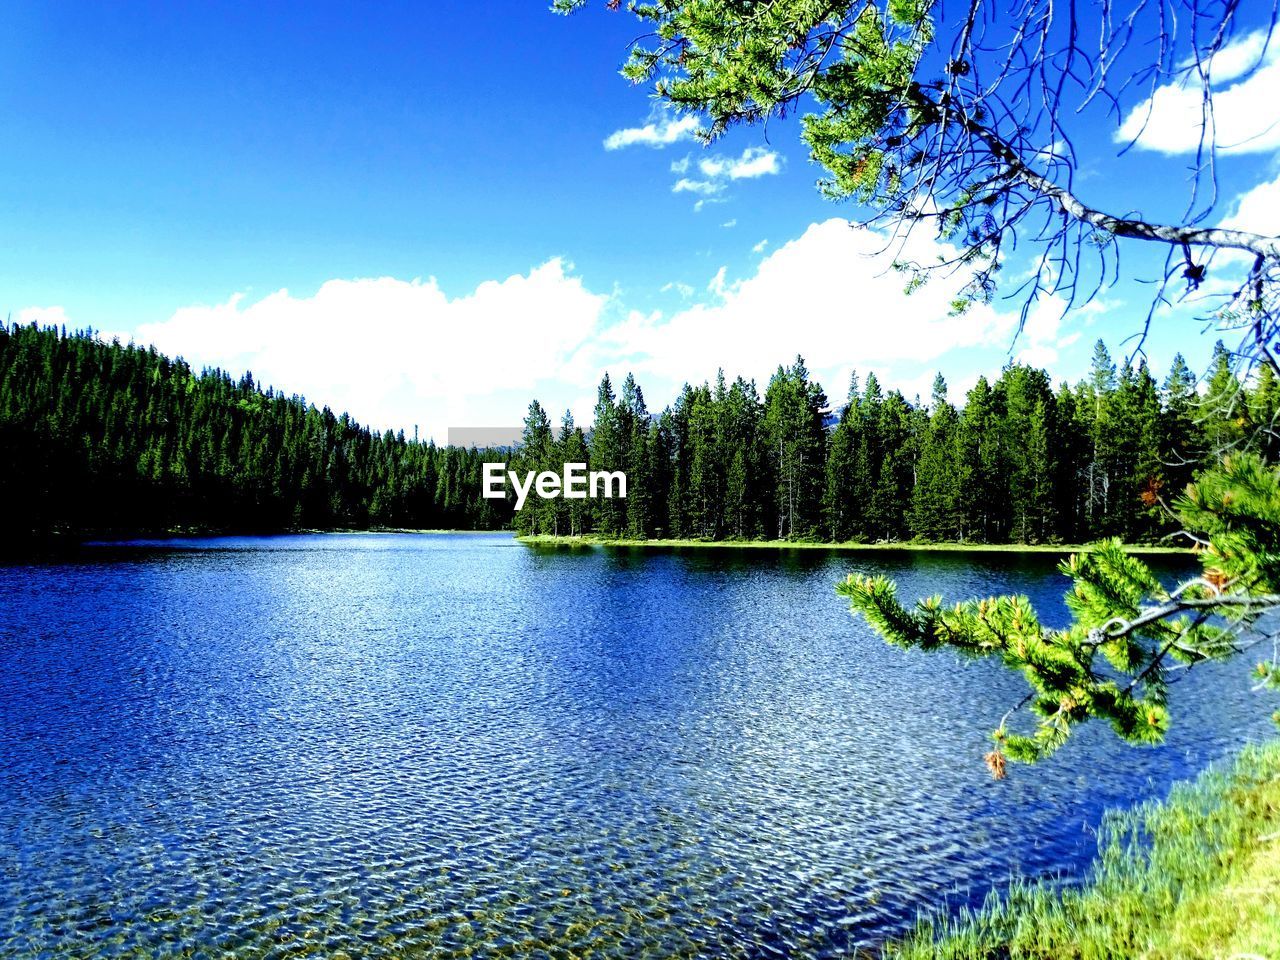 SCENIC VIEW OF LAKE AND TREES AGAINST BLUE SKY